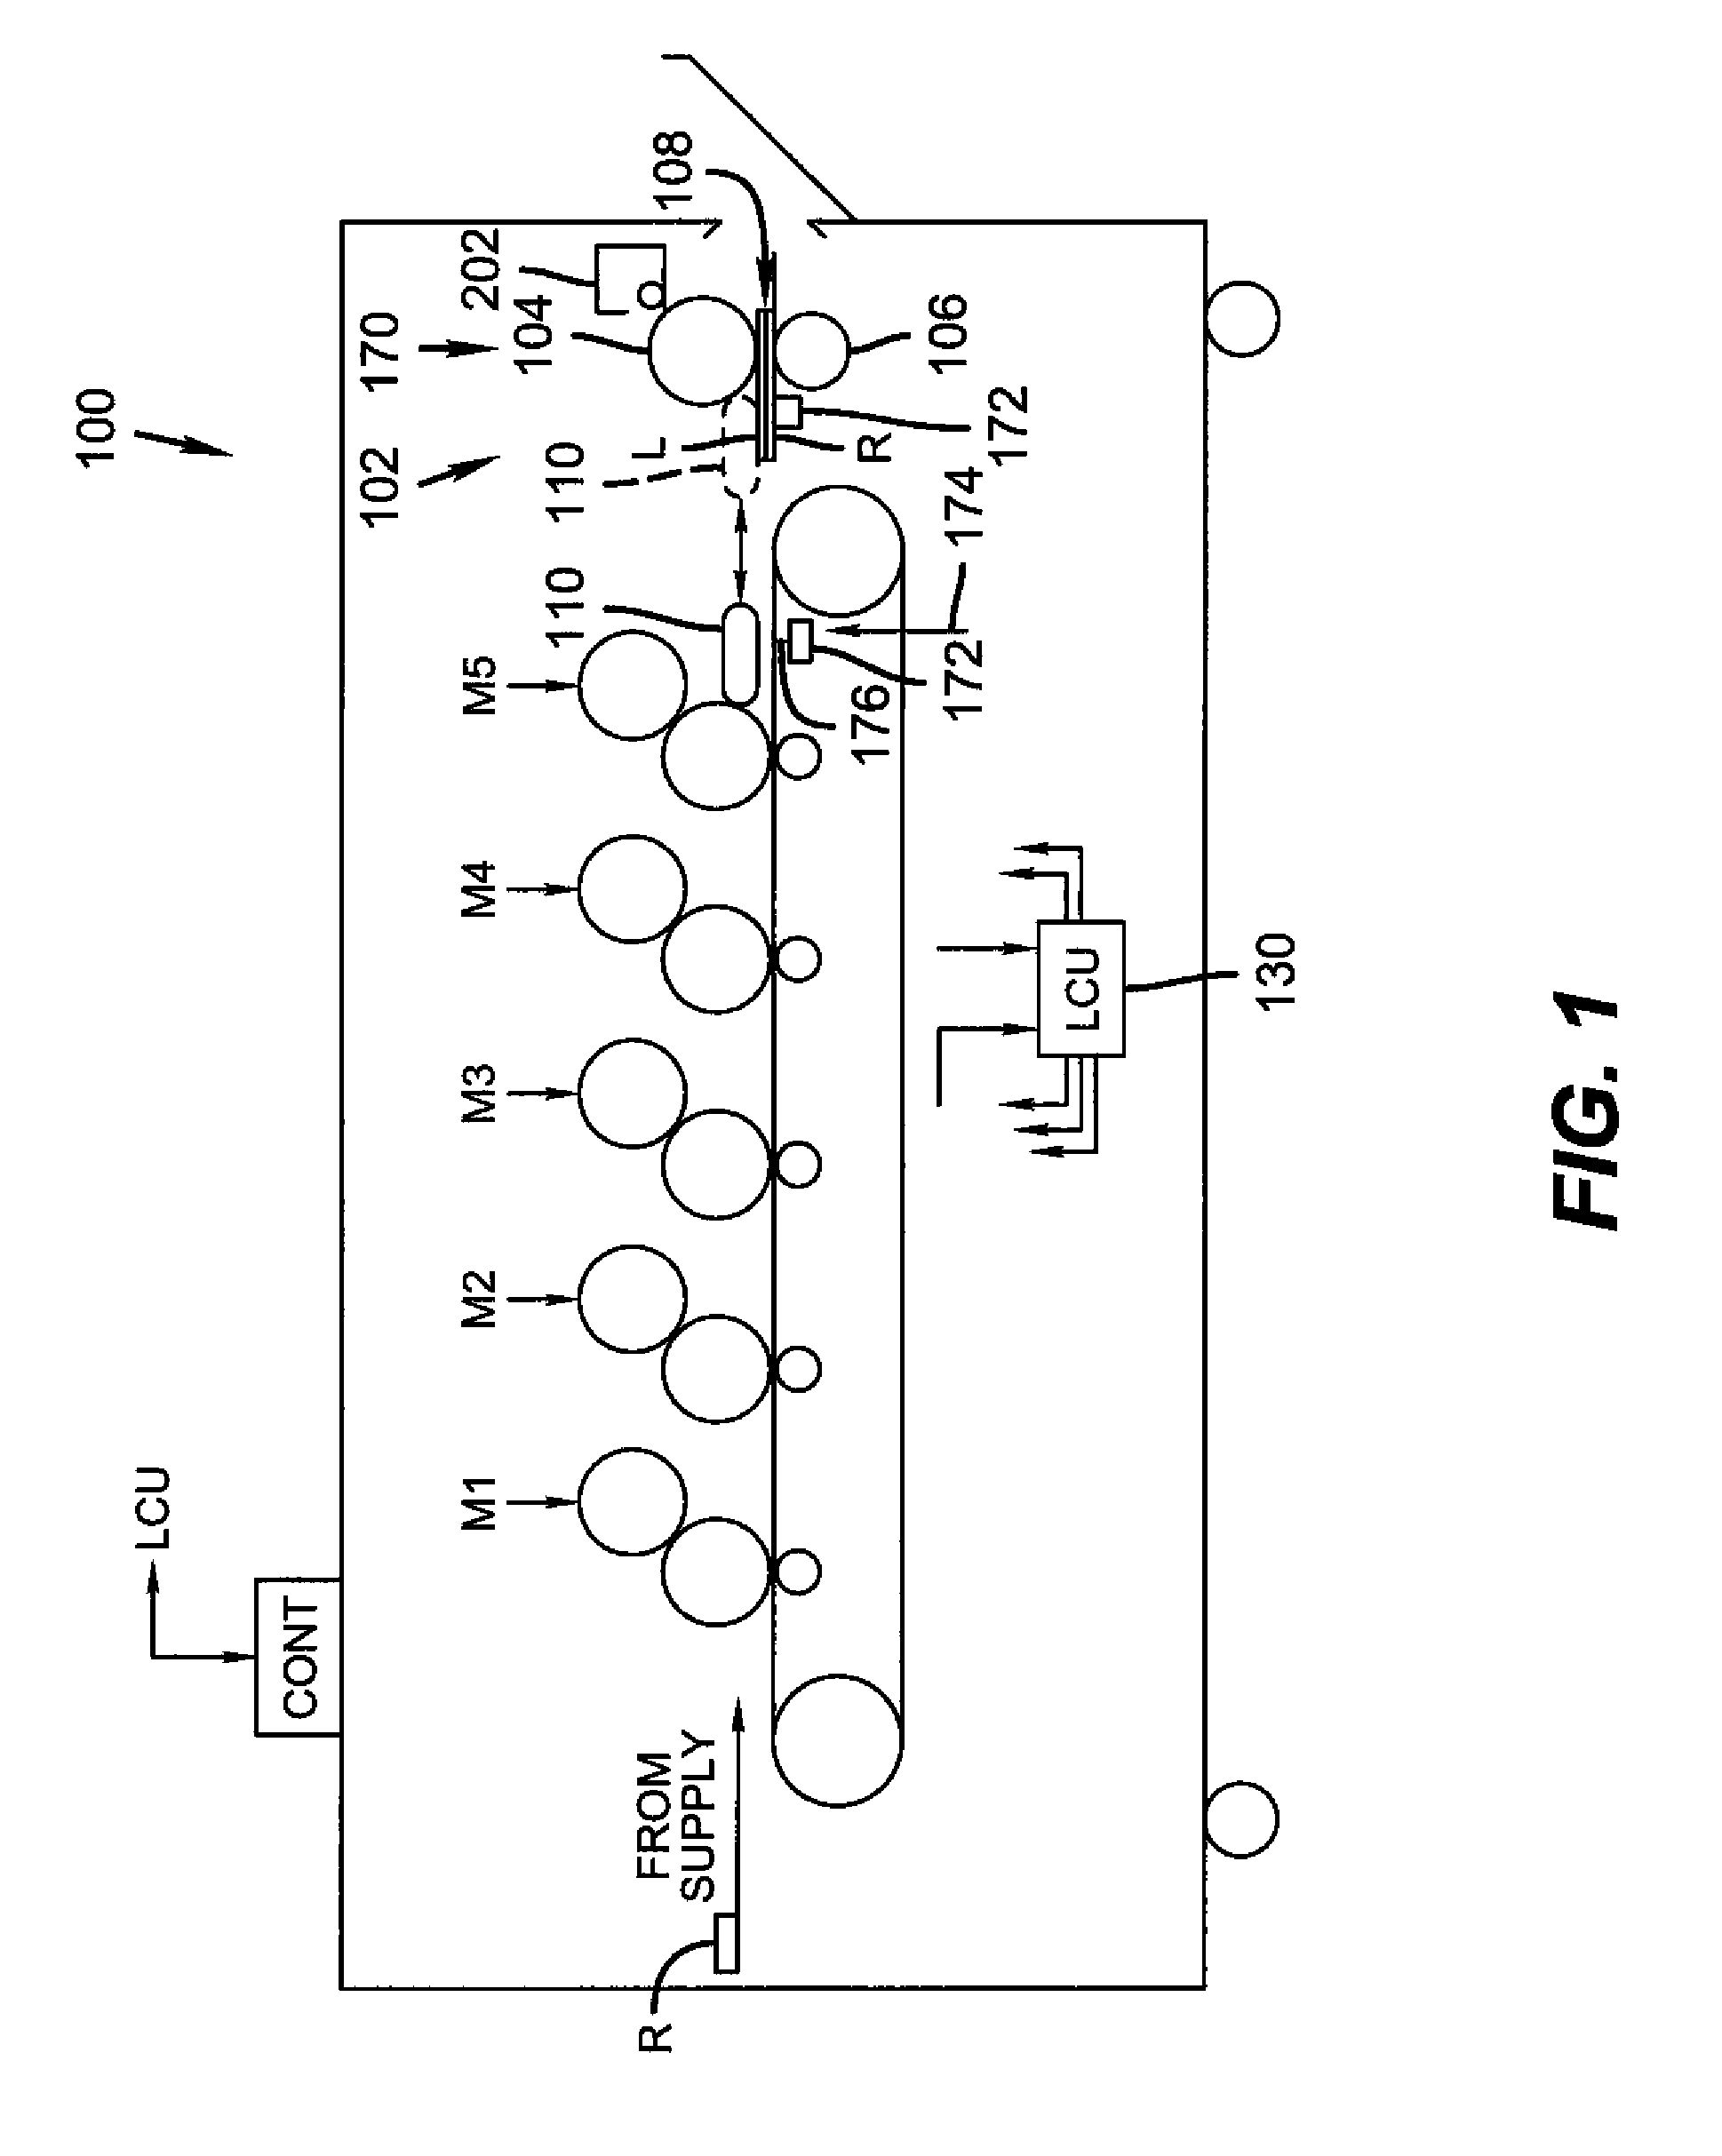 Digital manufacture of an electrical circuit